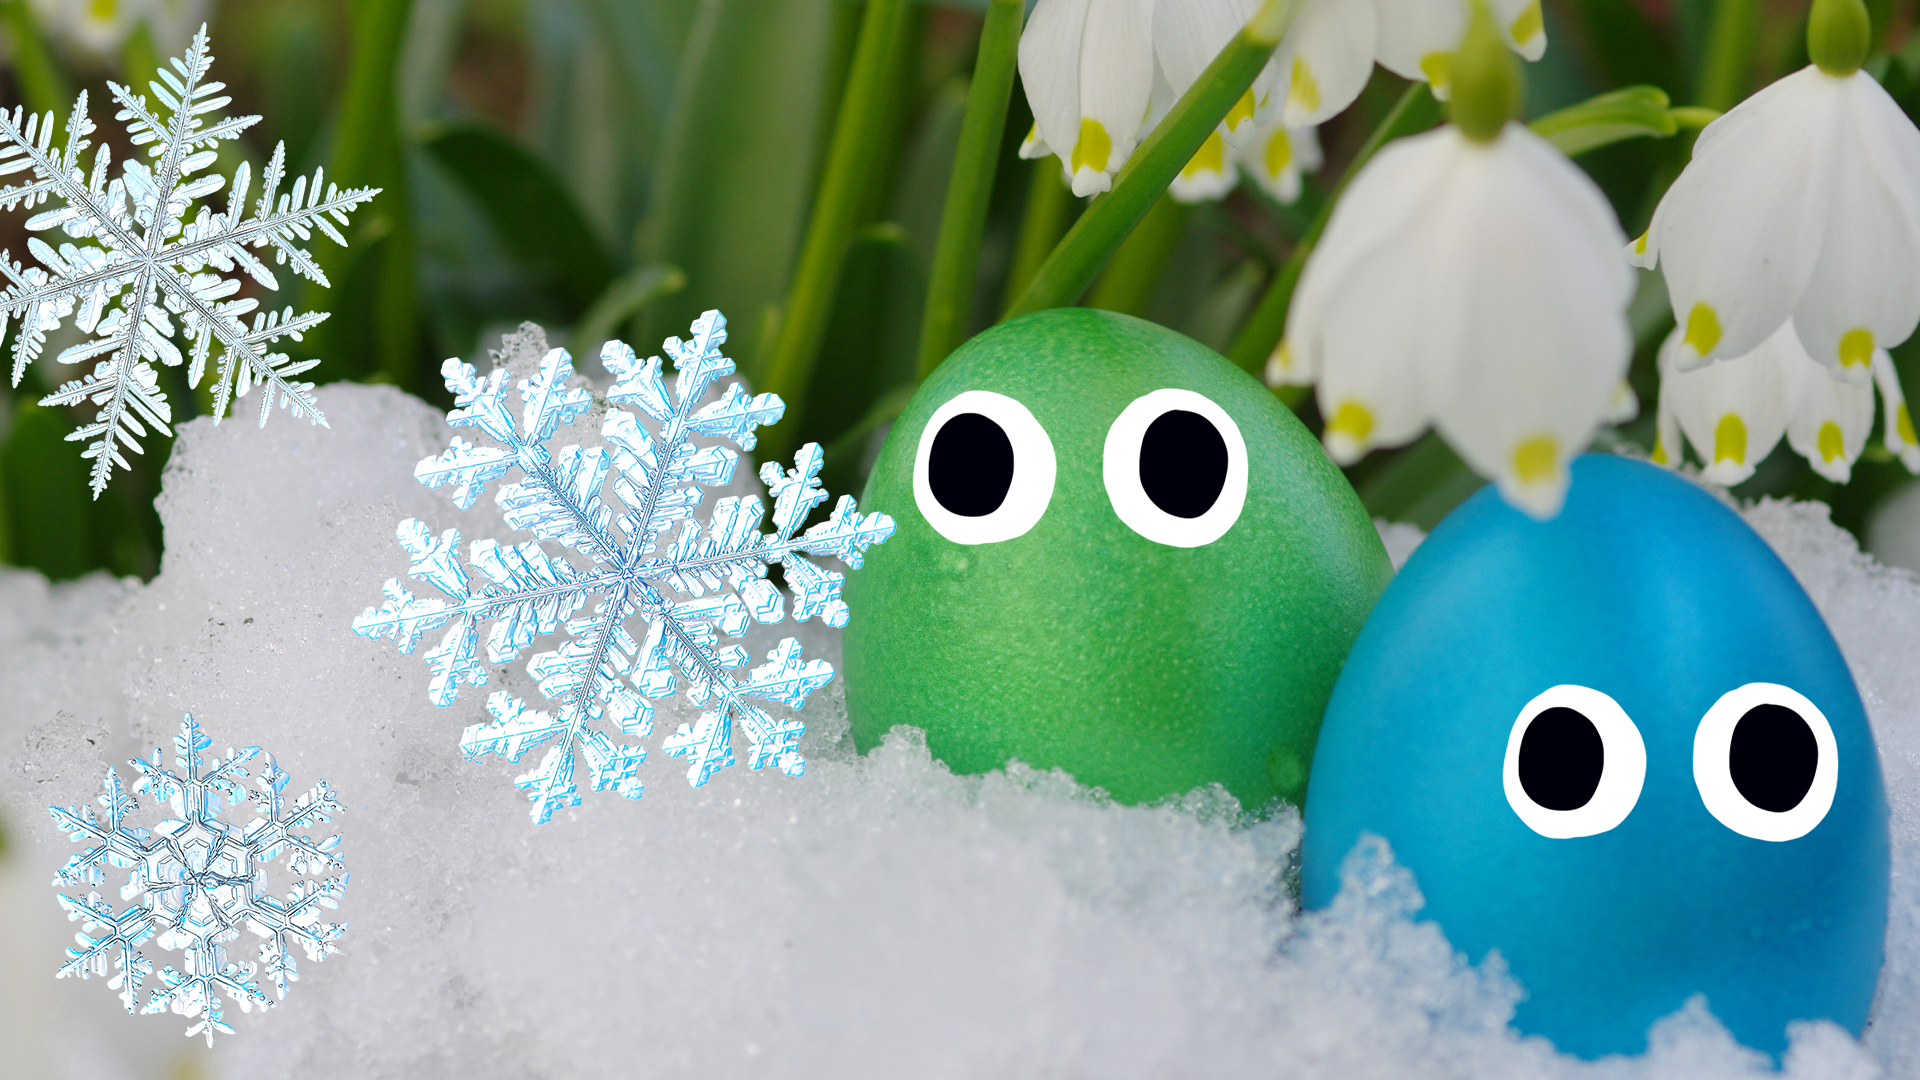 Eggs with eyes and snowflakes